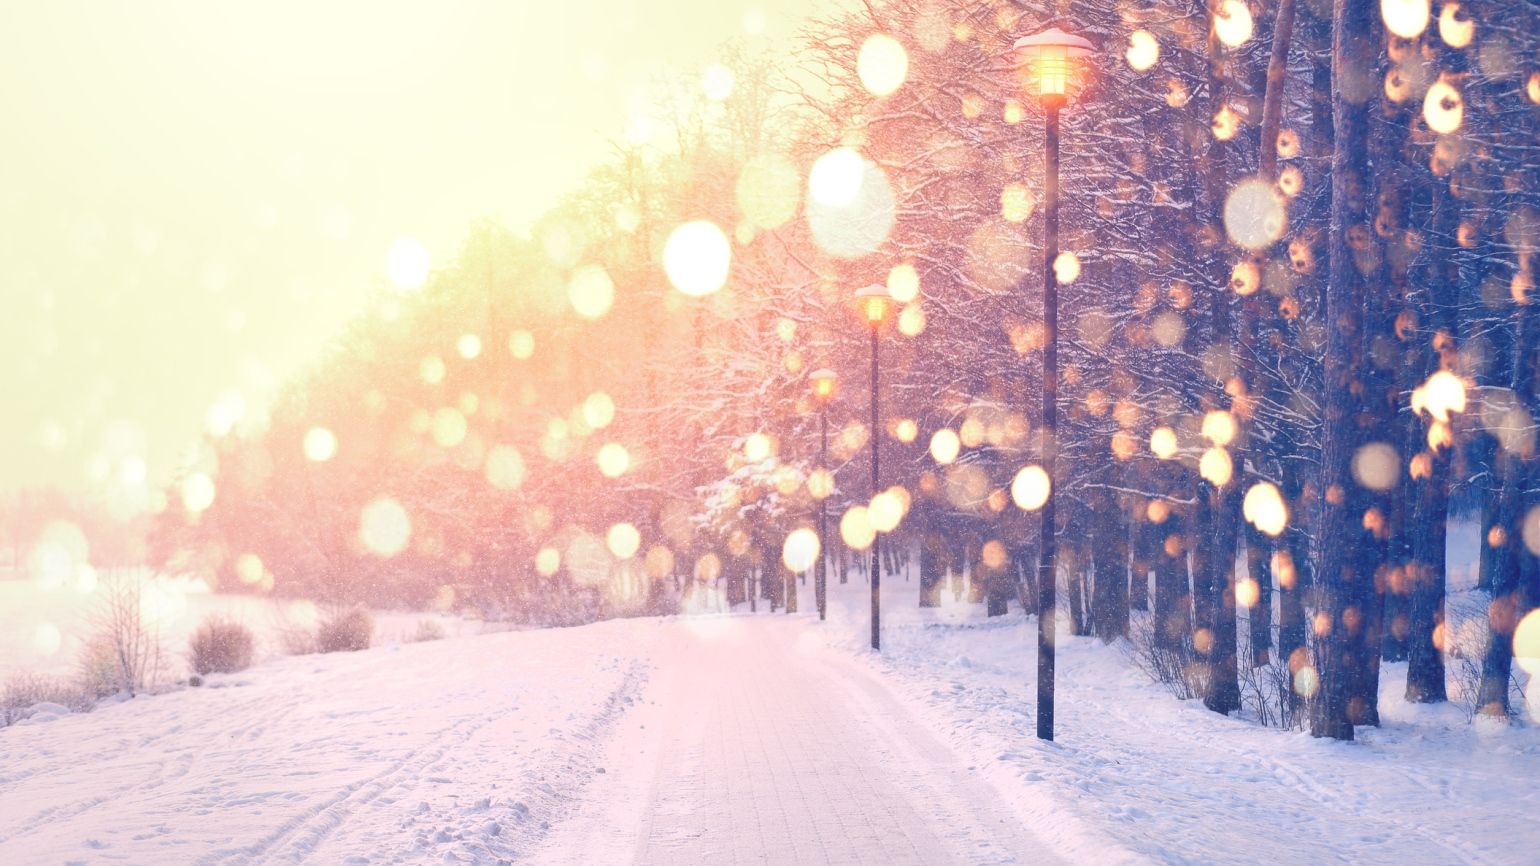 A snowy road in the sunlight with a New Year prayer for peace